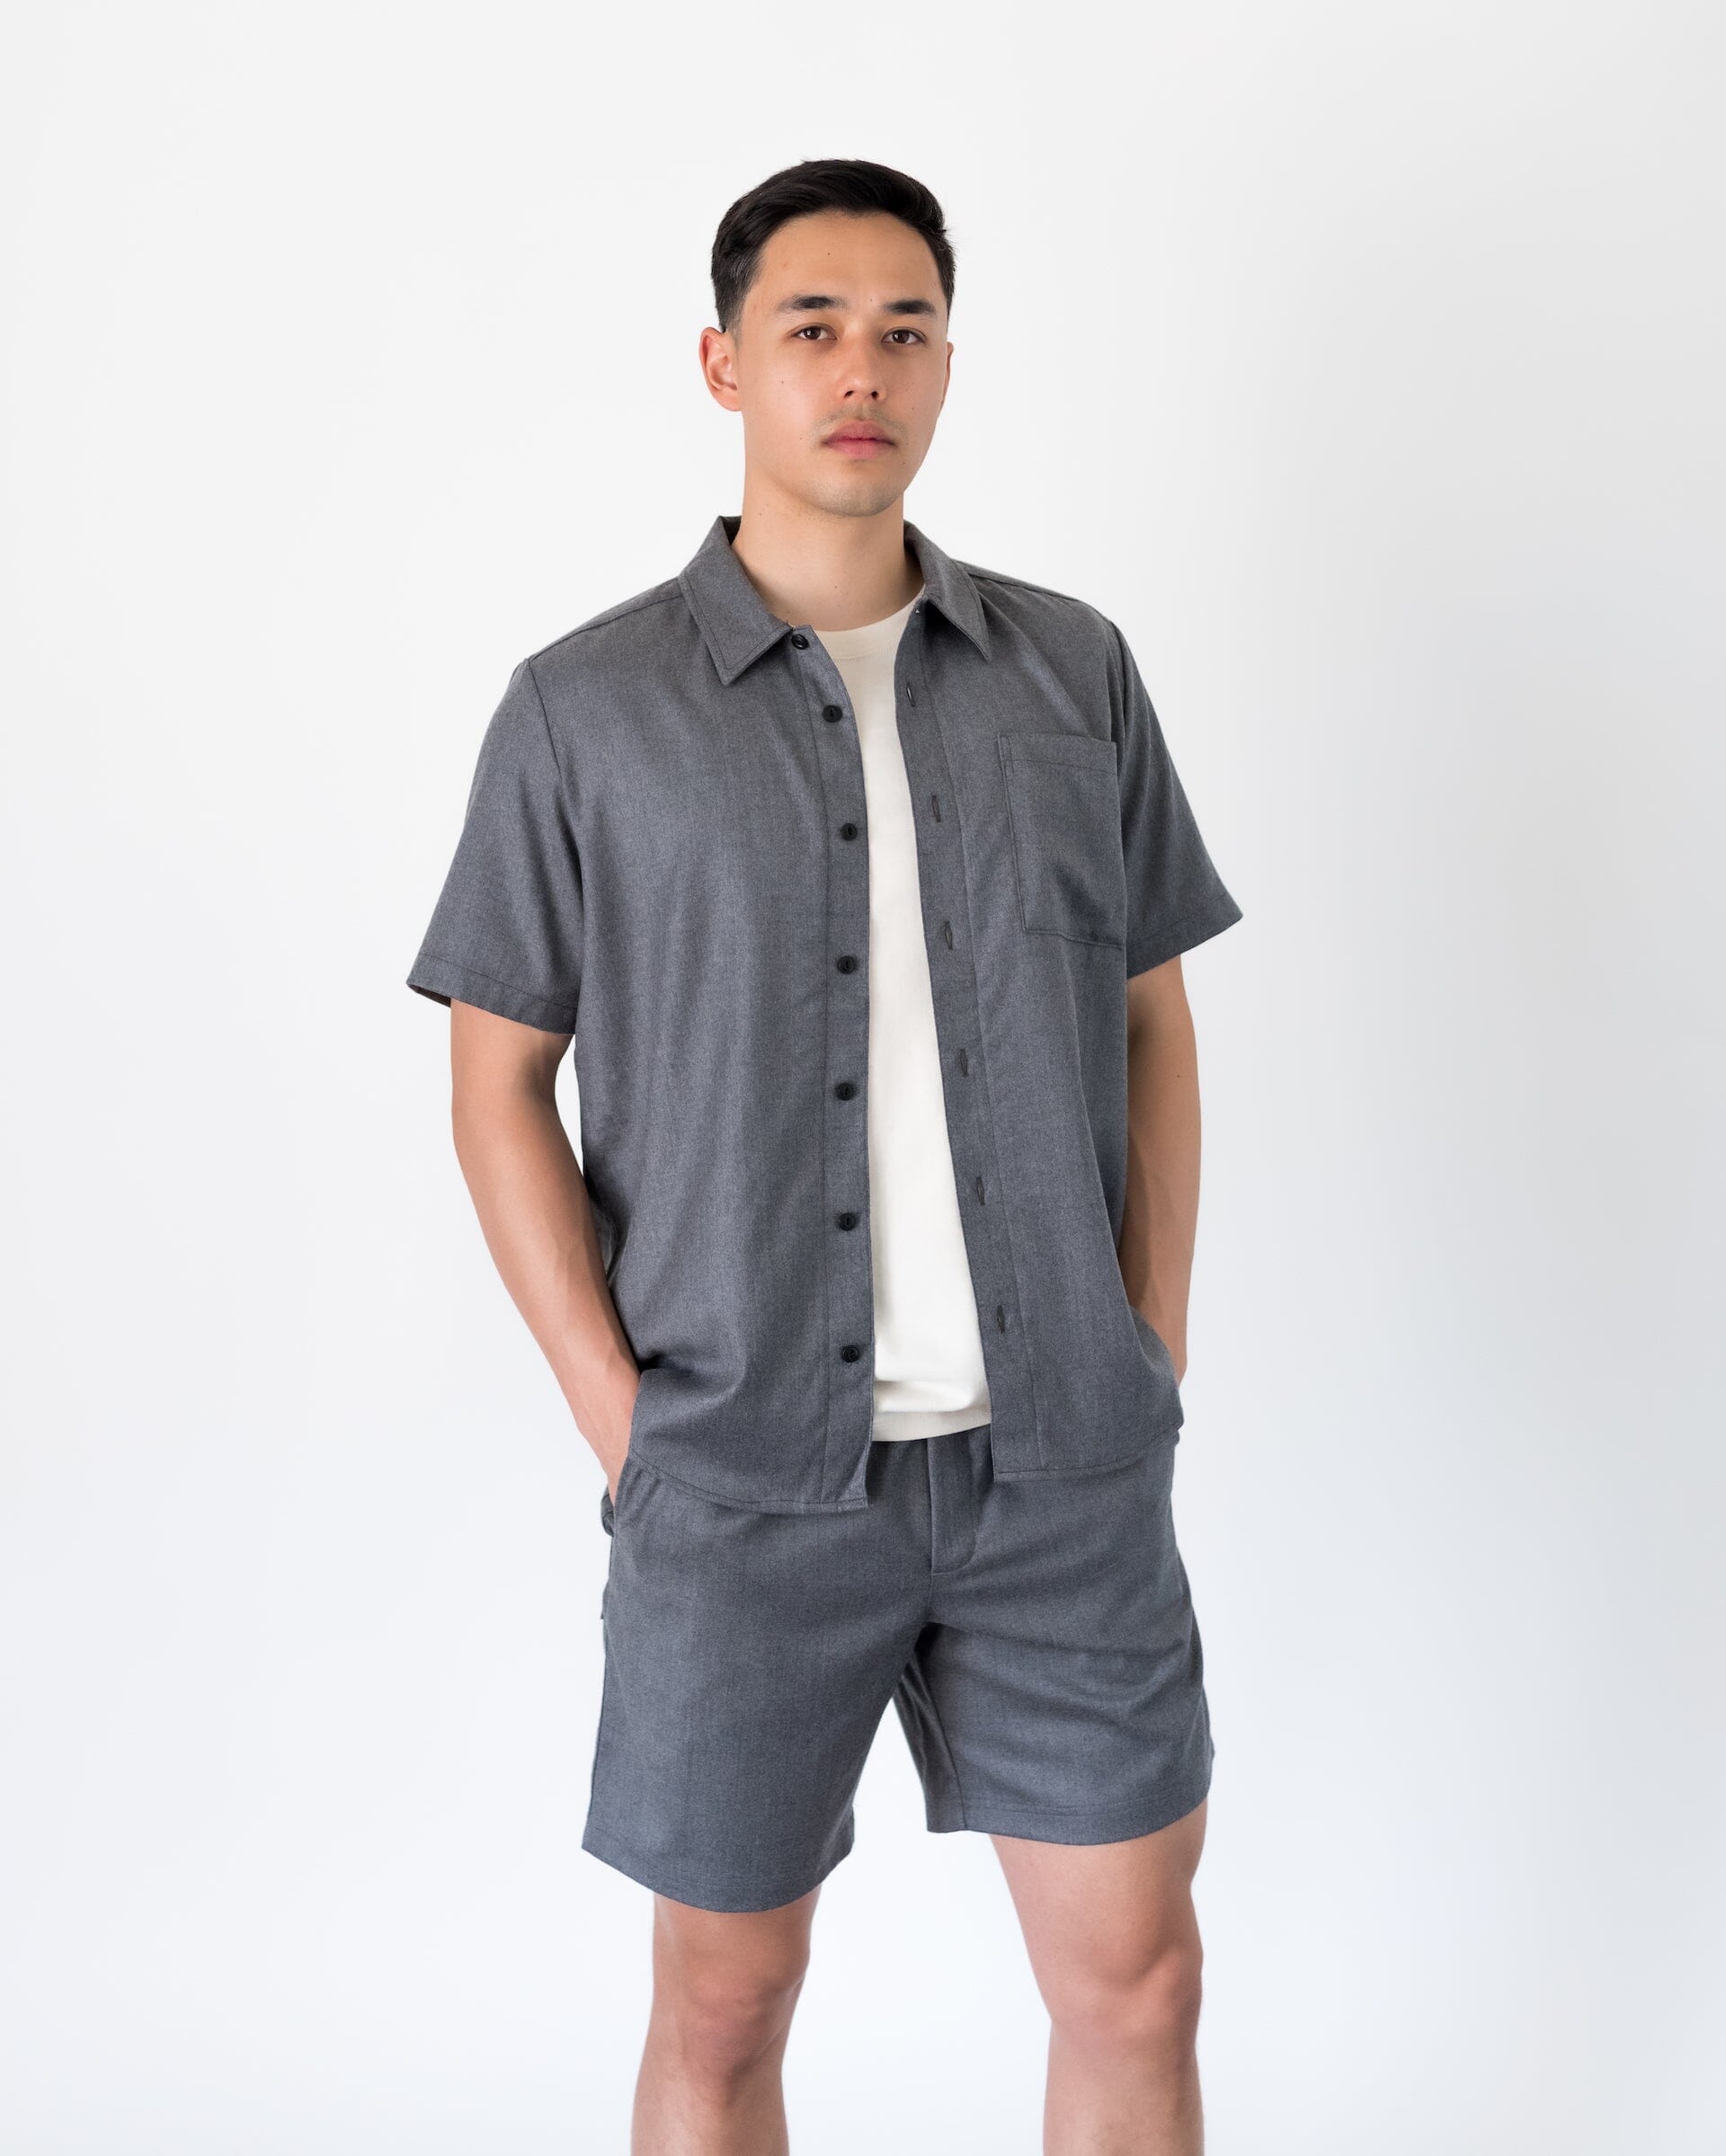 The Light Wool Short Sleeve Shirt in Heather Grey - Full Body 1 #color_heather greyy